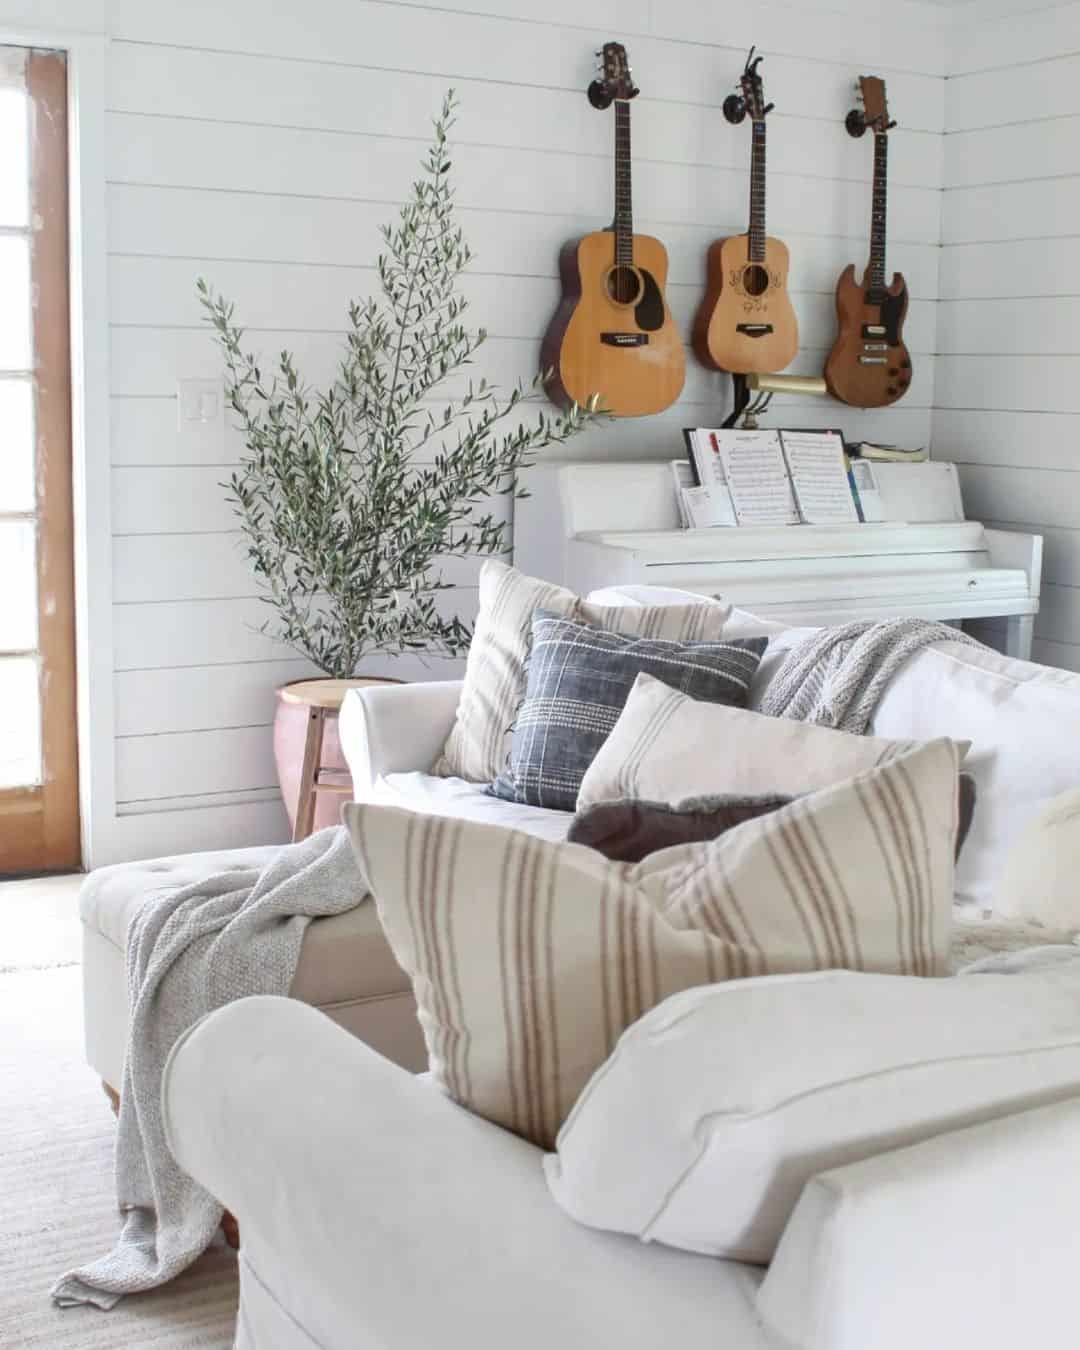 Musical Vibes in Shiplap-Clad Living Space